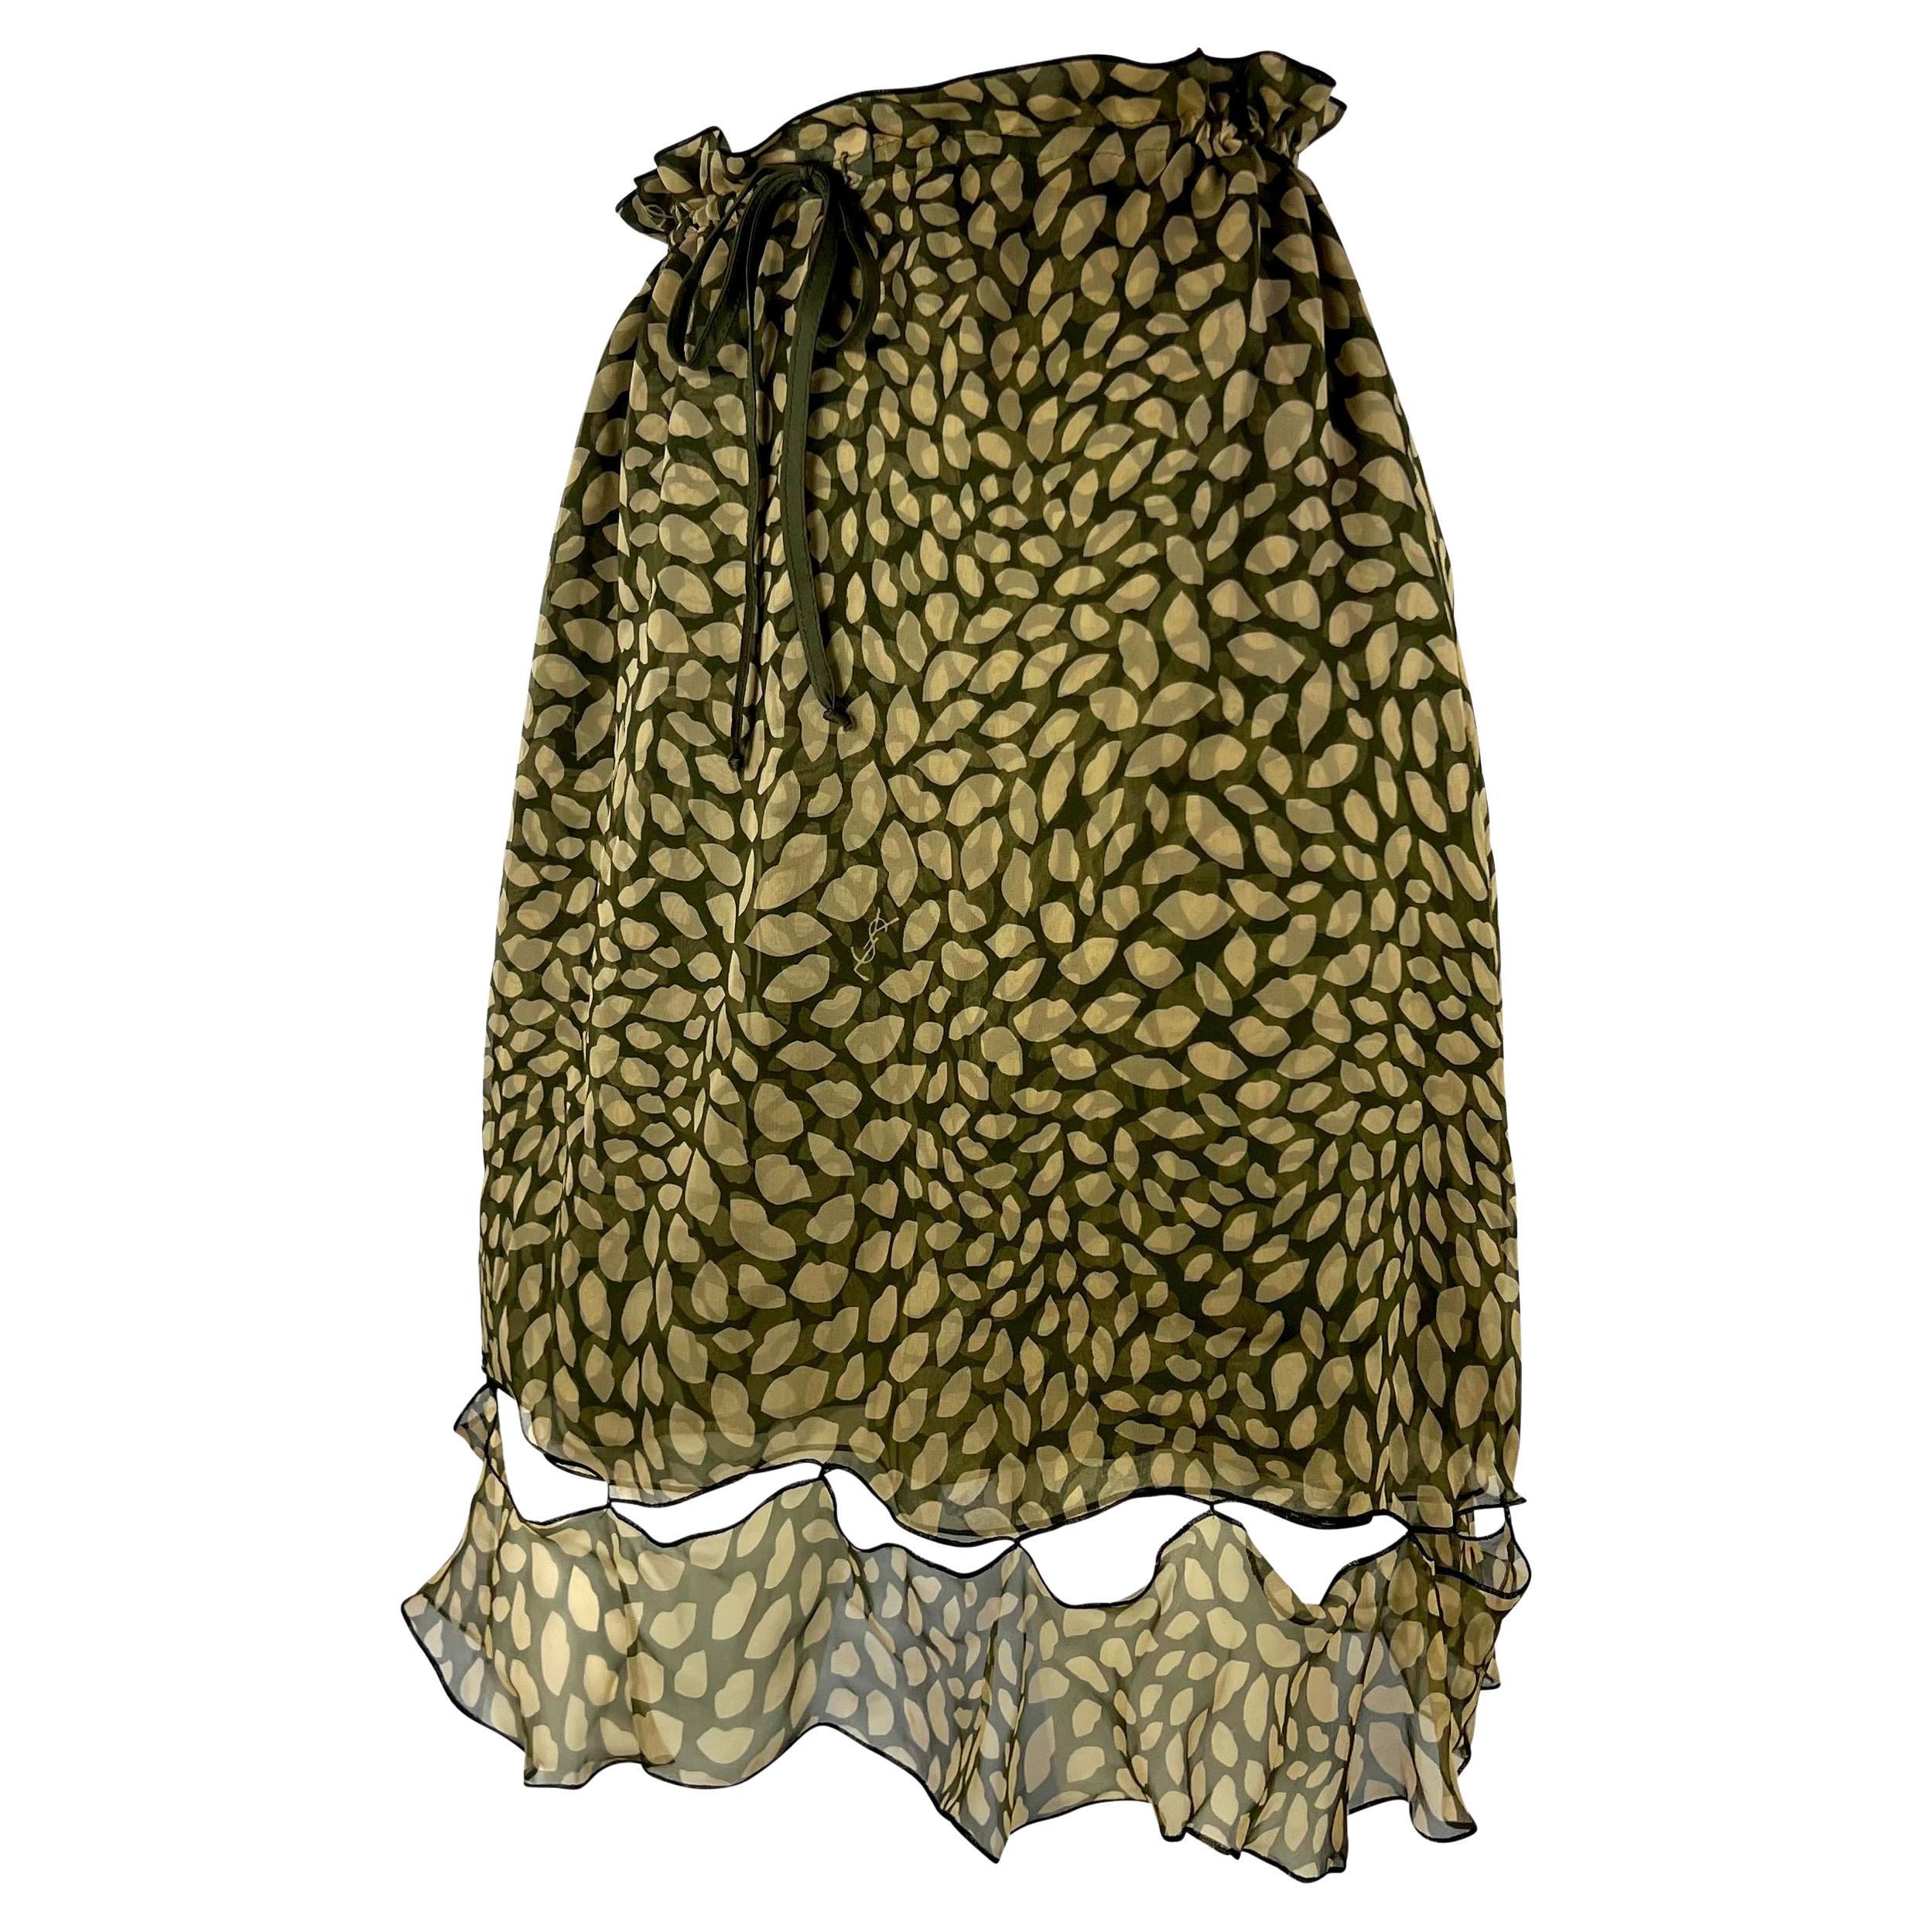 Presenting a semi-sheer green lip print silk skirt designed by Stefano Pilati for Yves Saint Laurent Rive Gauche's 2005 Resort collection. For his first collection as creative director, Pilati took YSL's red lip print from his iconic Spring/Summer